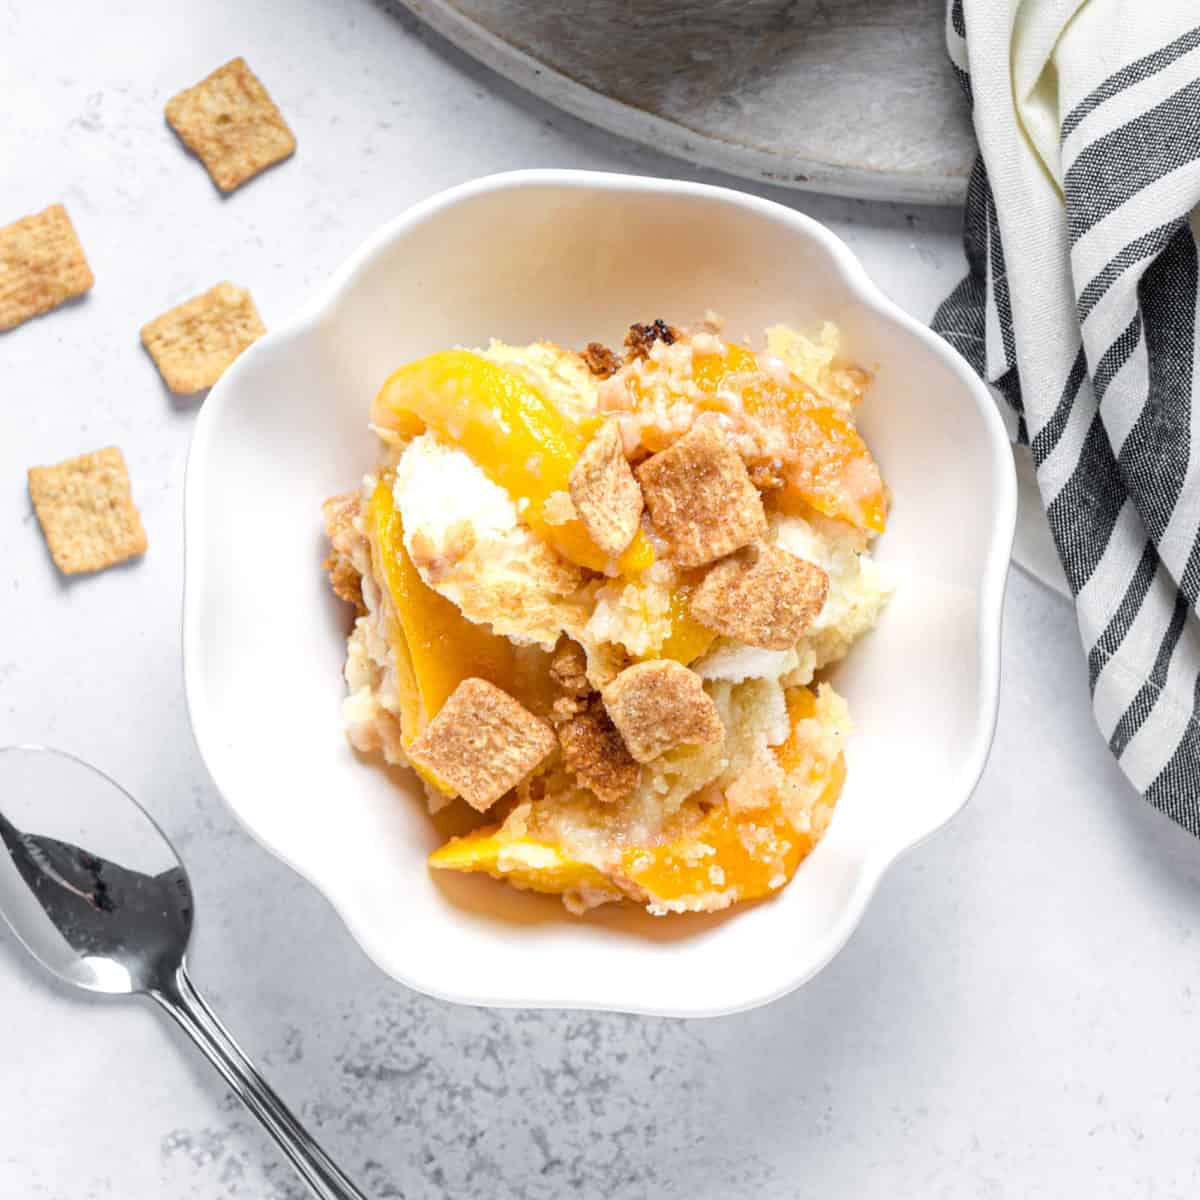 Peach cobbler in a bowl with Cinnamon Toast Crunch cereal.